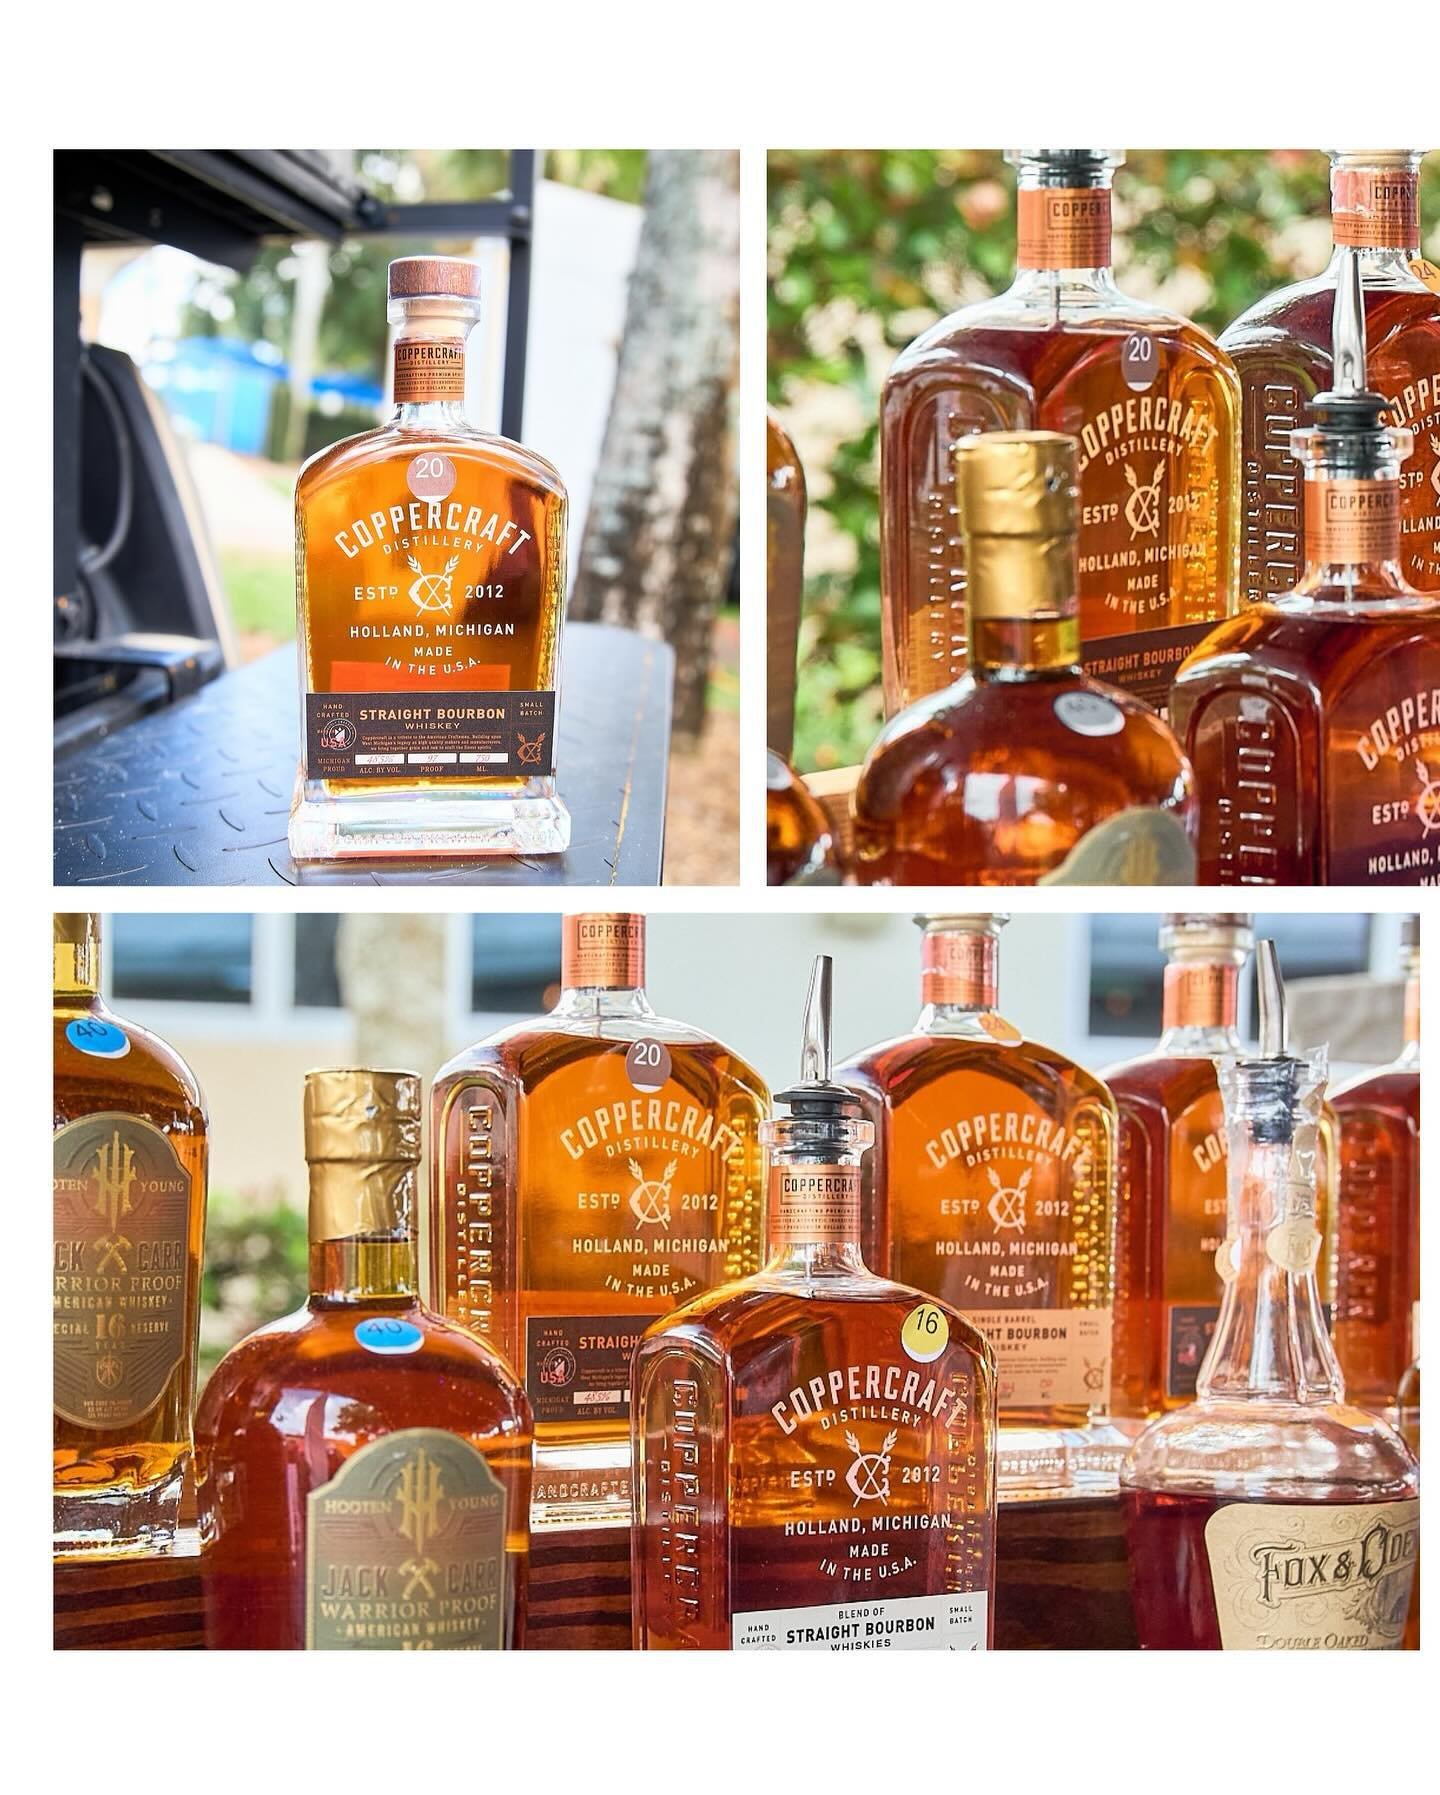 Product Photography - one of my more favorite things to shoot. Some quick product shots of @coppercraftdistillery at this years Bacon and Bourbon Fest. 
.
.
📸 For Bacon and Bourbon Festival 
👉 Have product photography needs? Contact me today for a 